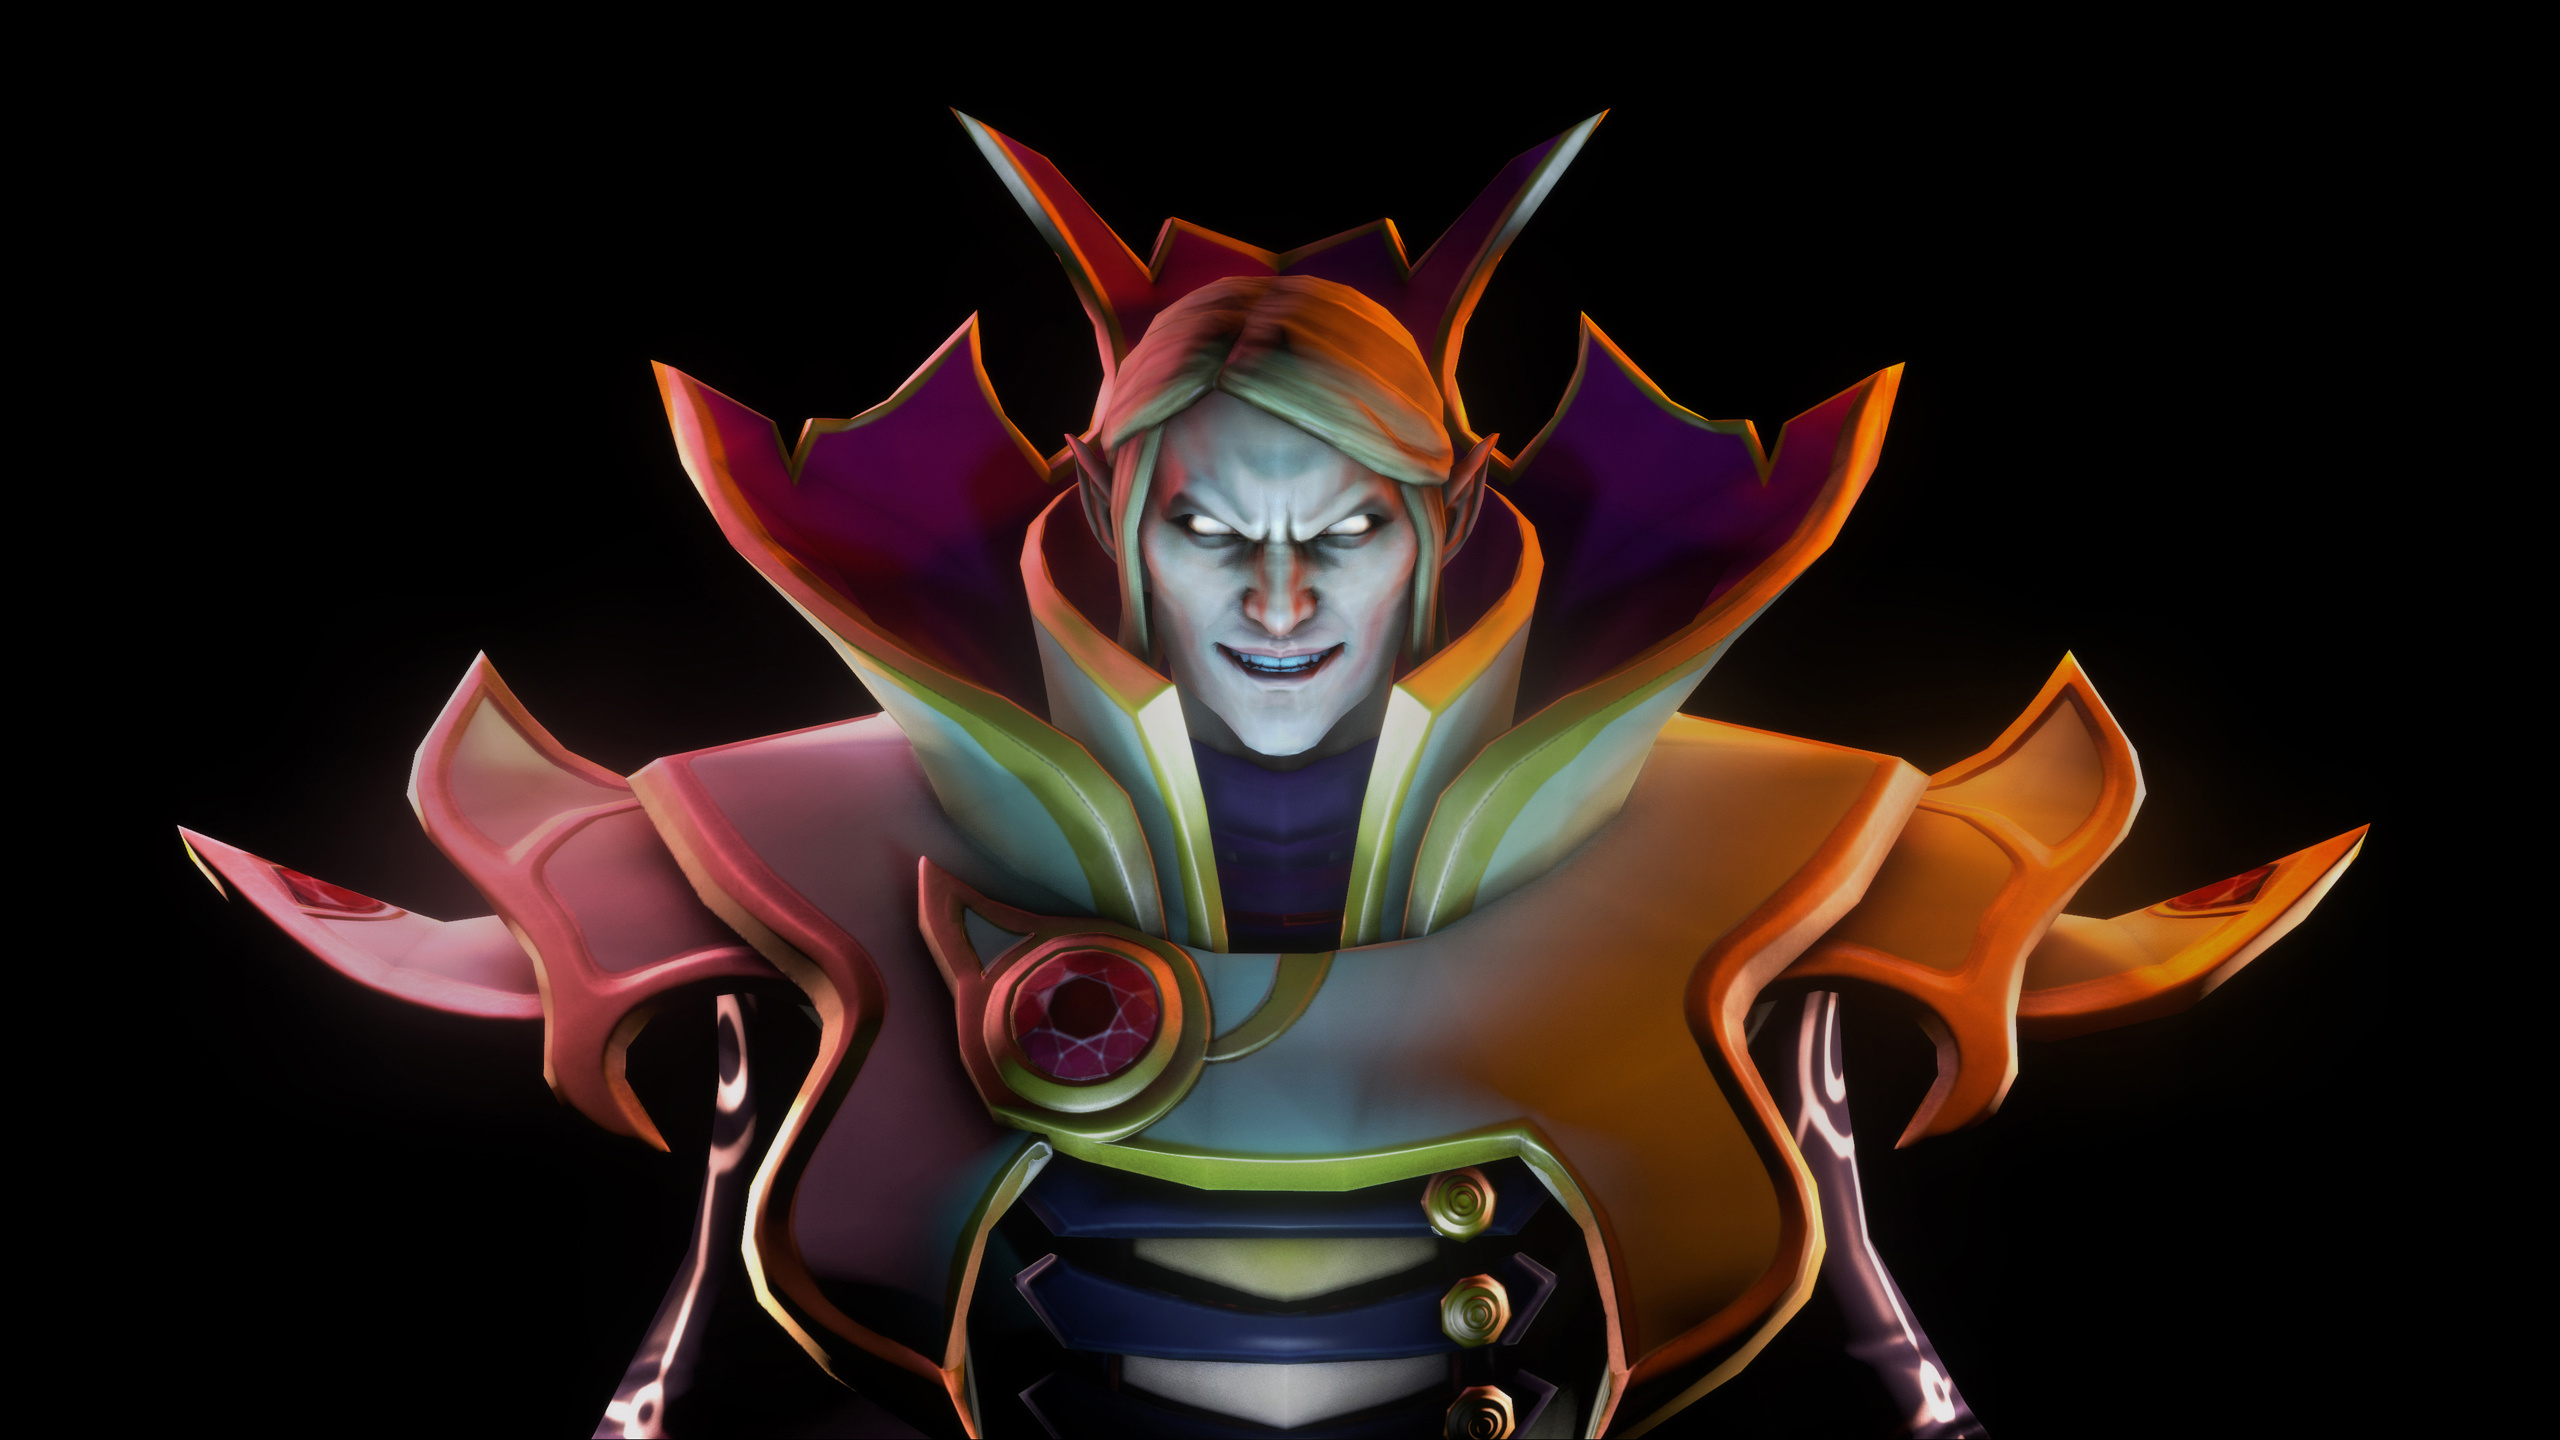 About dota character фото 119